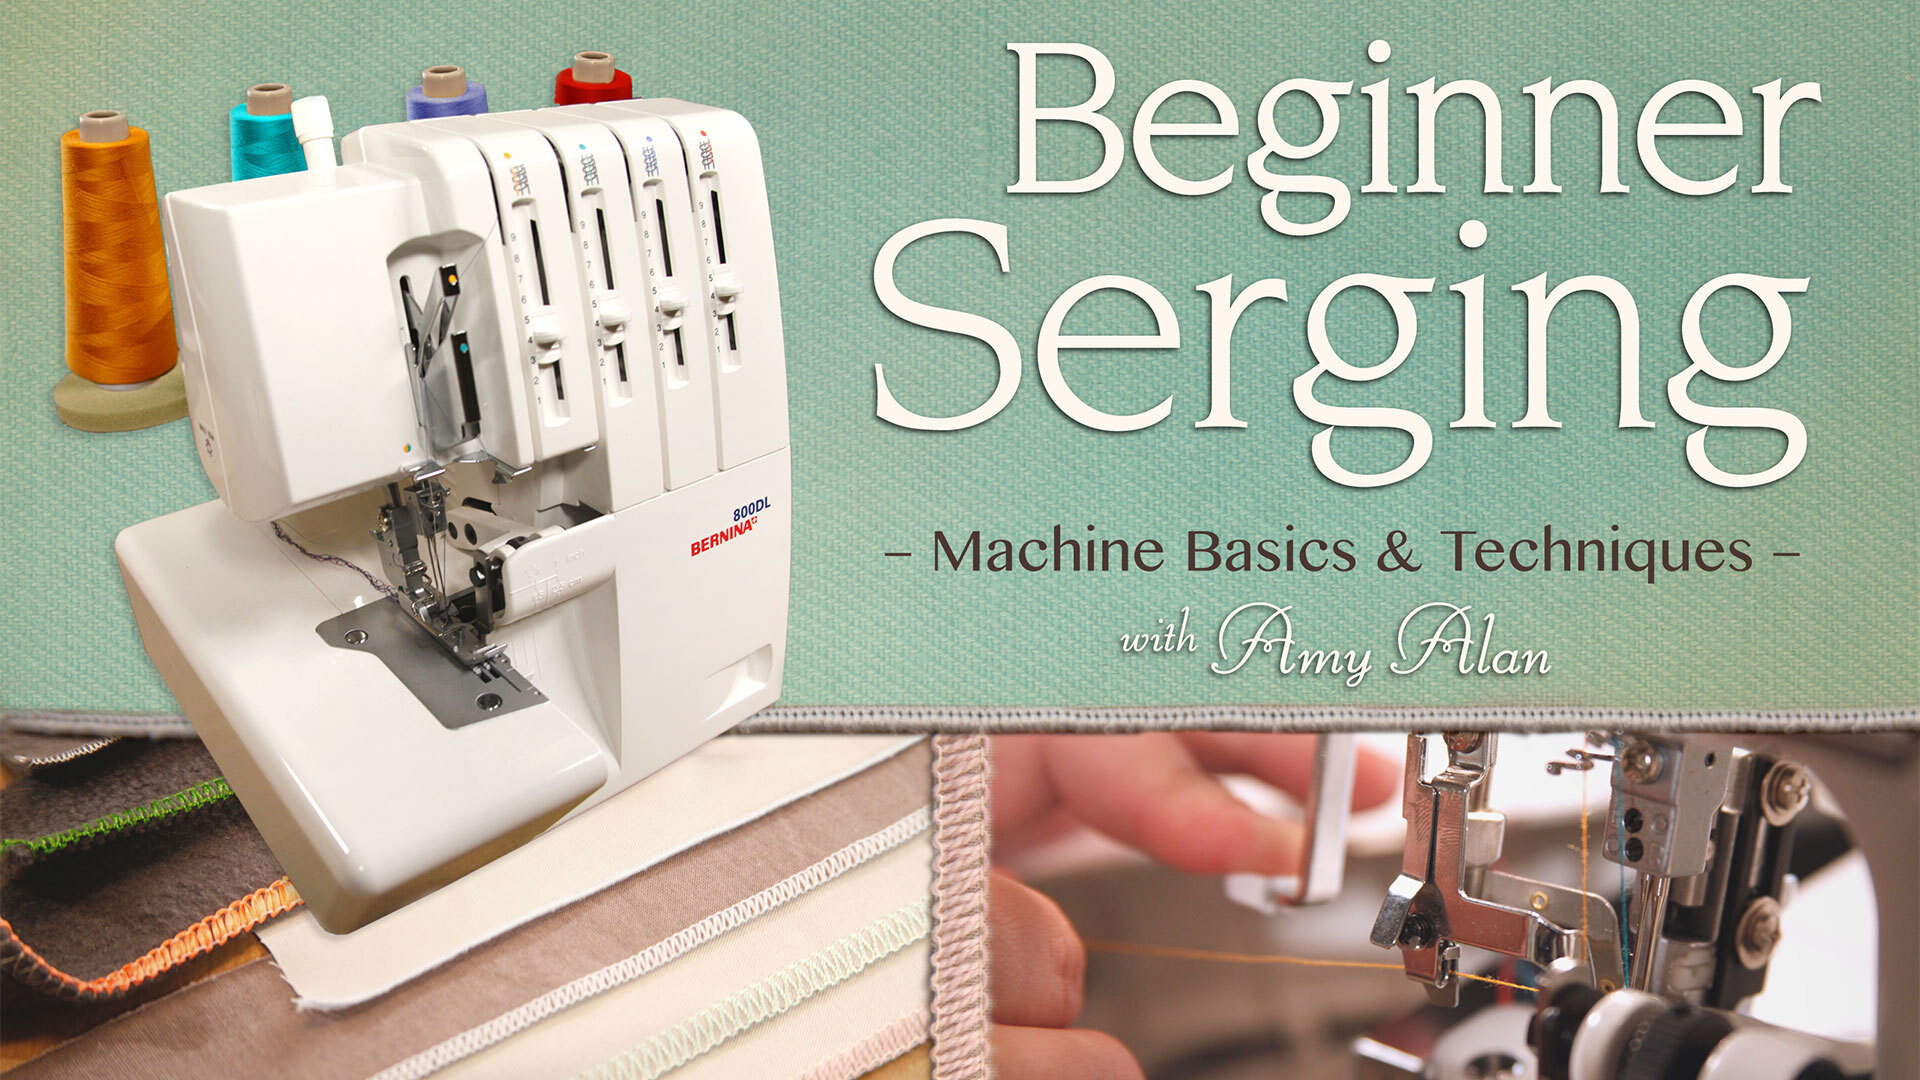 Serger Do's and Dont's